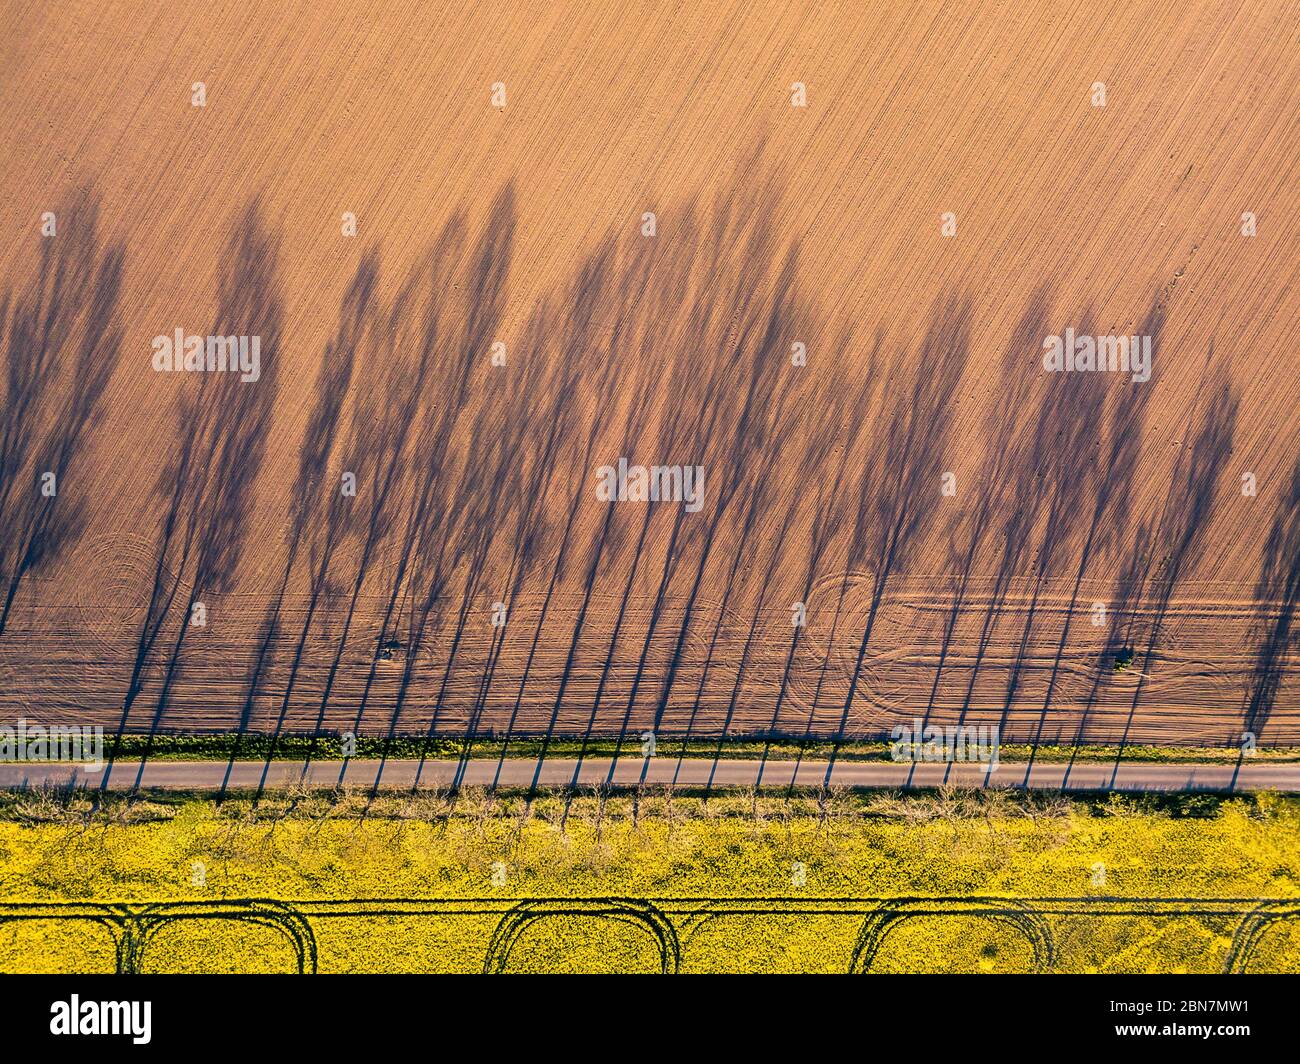 Aerial view of shadow of trees by a road, agriculture concept from drone perspective. Natural flat background directly above fields. Drone photography Stock Photo